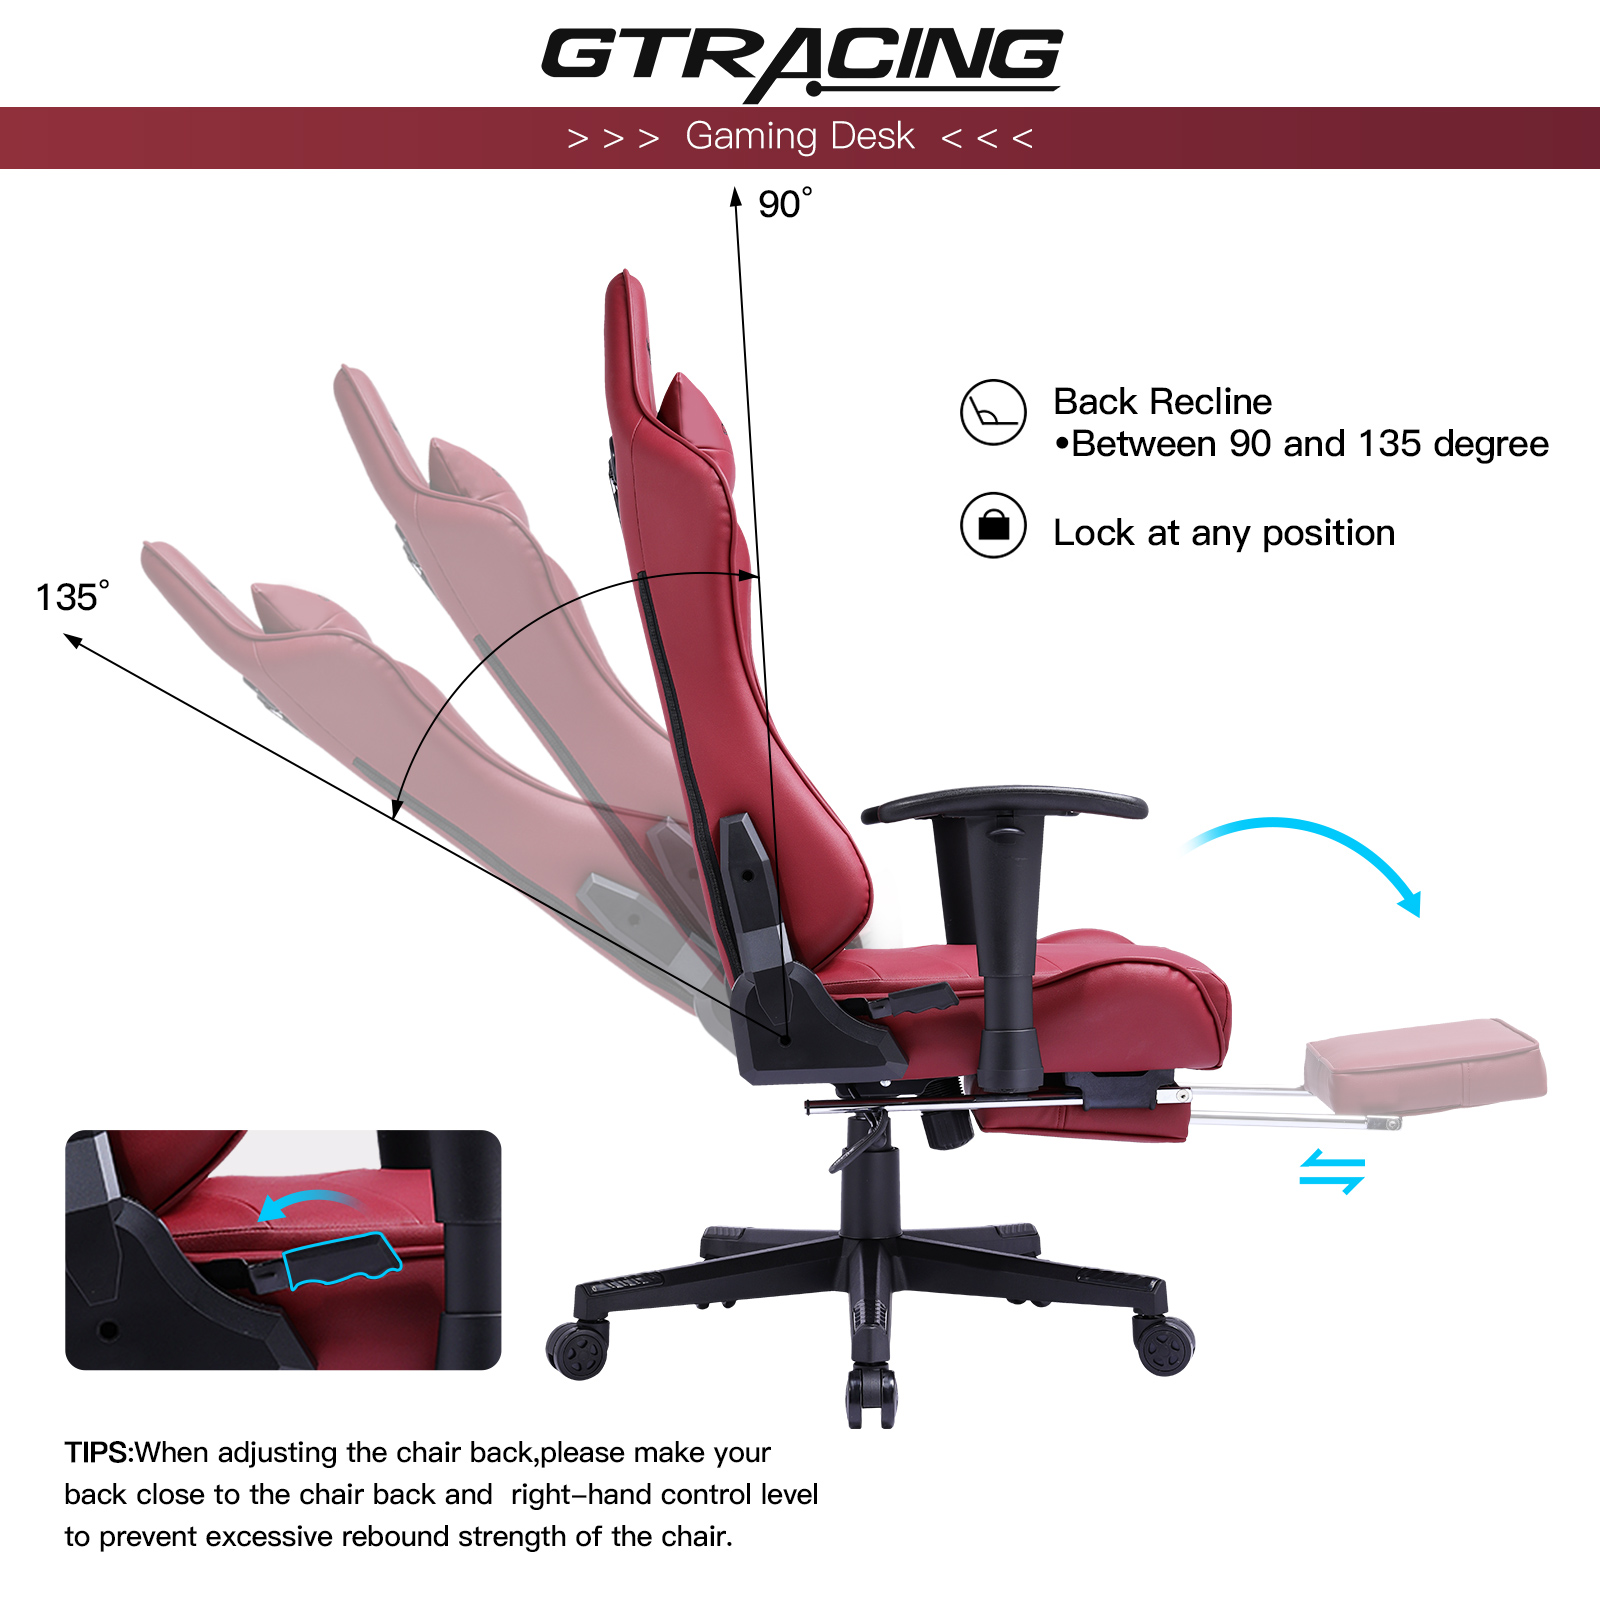 GTRACING Gaming Chair with Footrest Ergonomic Reclining Leather Chair, Dark Red - image 5 of 6